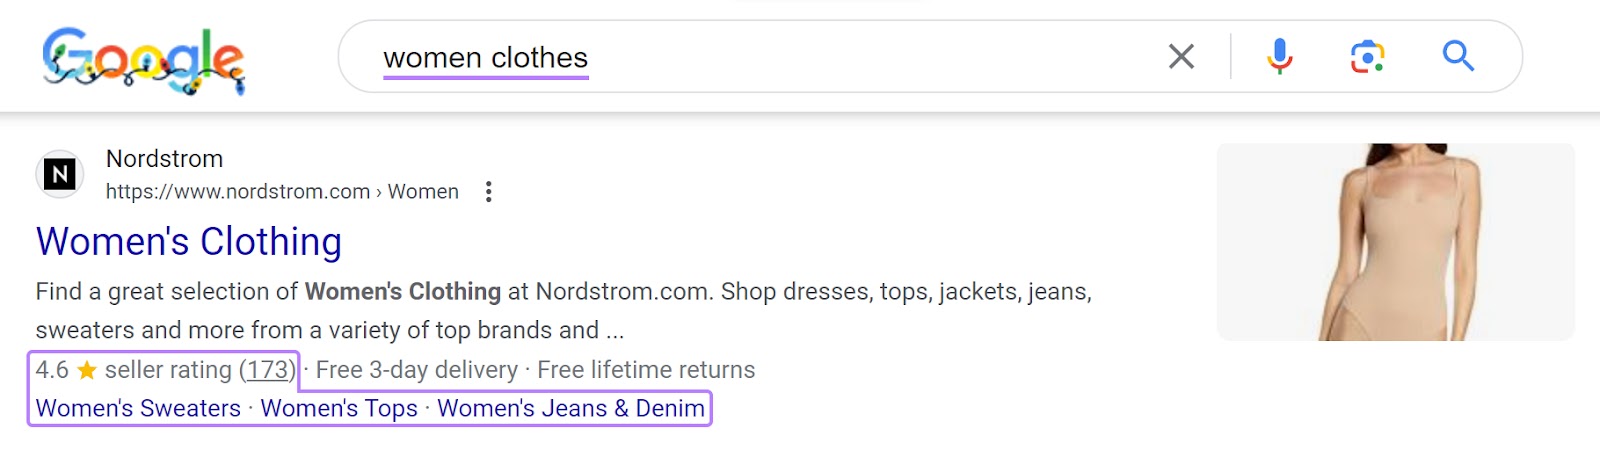 A rich snippet result appearing for "women clothes" keyword